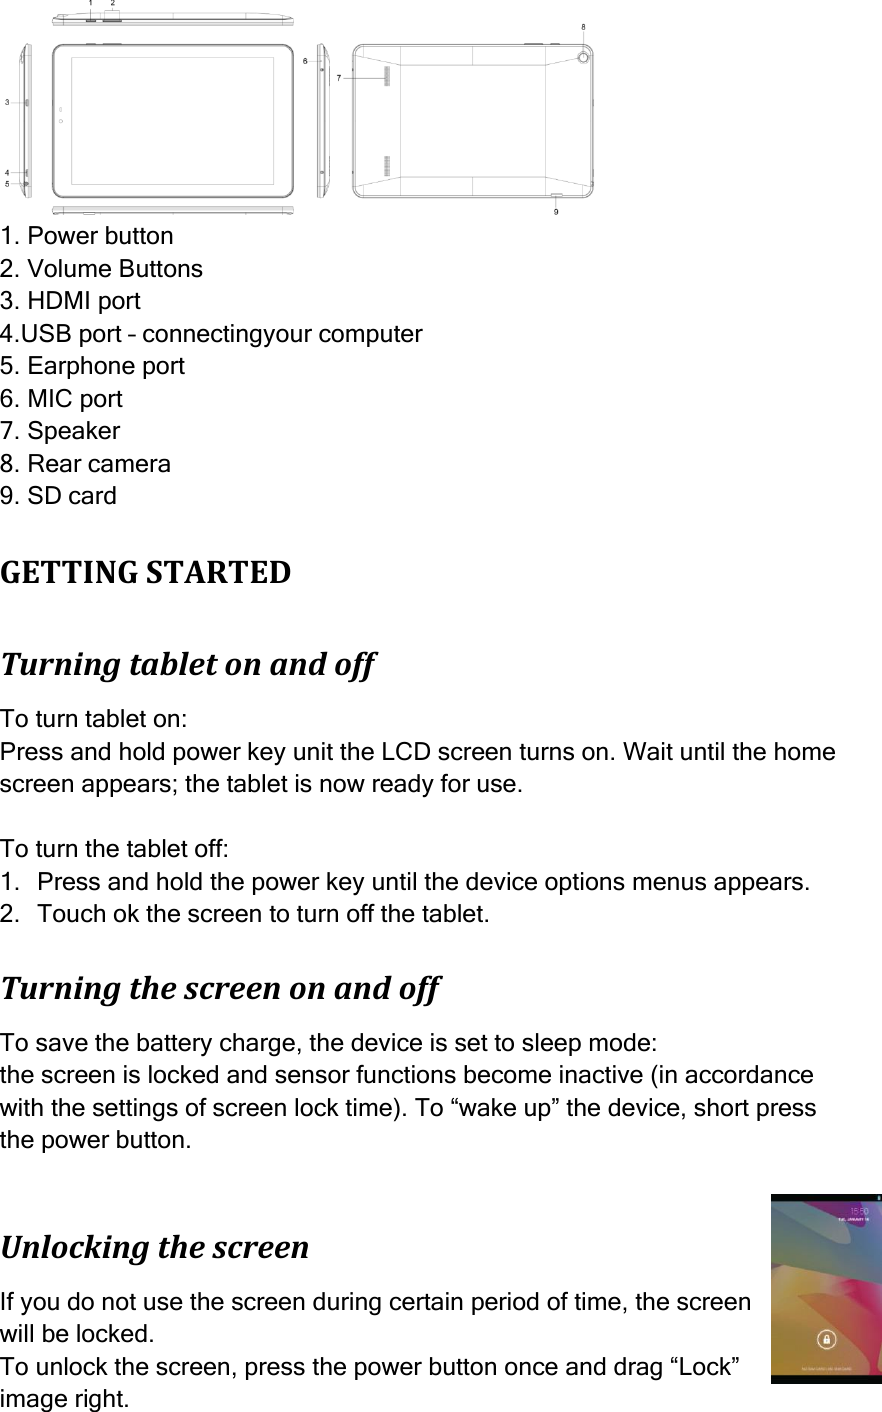    1. Power button 2. Volume Buttons 3. HDMI port 4.USB port – connectingyour computer 5. Earphone port 6. MIC port 7. Speaker 8. Rear camera 9. SD card GETTING STARTED Turning tablet on and off To turn tablet on: Press and hold power key unit the LCD screen turns on. Wait until the home screen appears; the tablet is now ready for use.  To turn the tablet off: 1. Press and hold the power key until the device options menus appears. 2. Touch ok the screen to turn off the tablet. Turning the screen on and off To save the battery charge, the device is set to sleep mode: the screen is locked and sensor functions become inactive (in accordance with the settings of screen lock time). To “wake up” the device, short press the power button.  Unlocking the screen If you do not use the screen during certain period of time, the screen will be locked. To unlock the screen, press the power button once and drag “Lock” image right.  